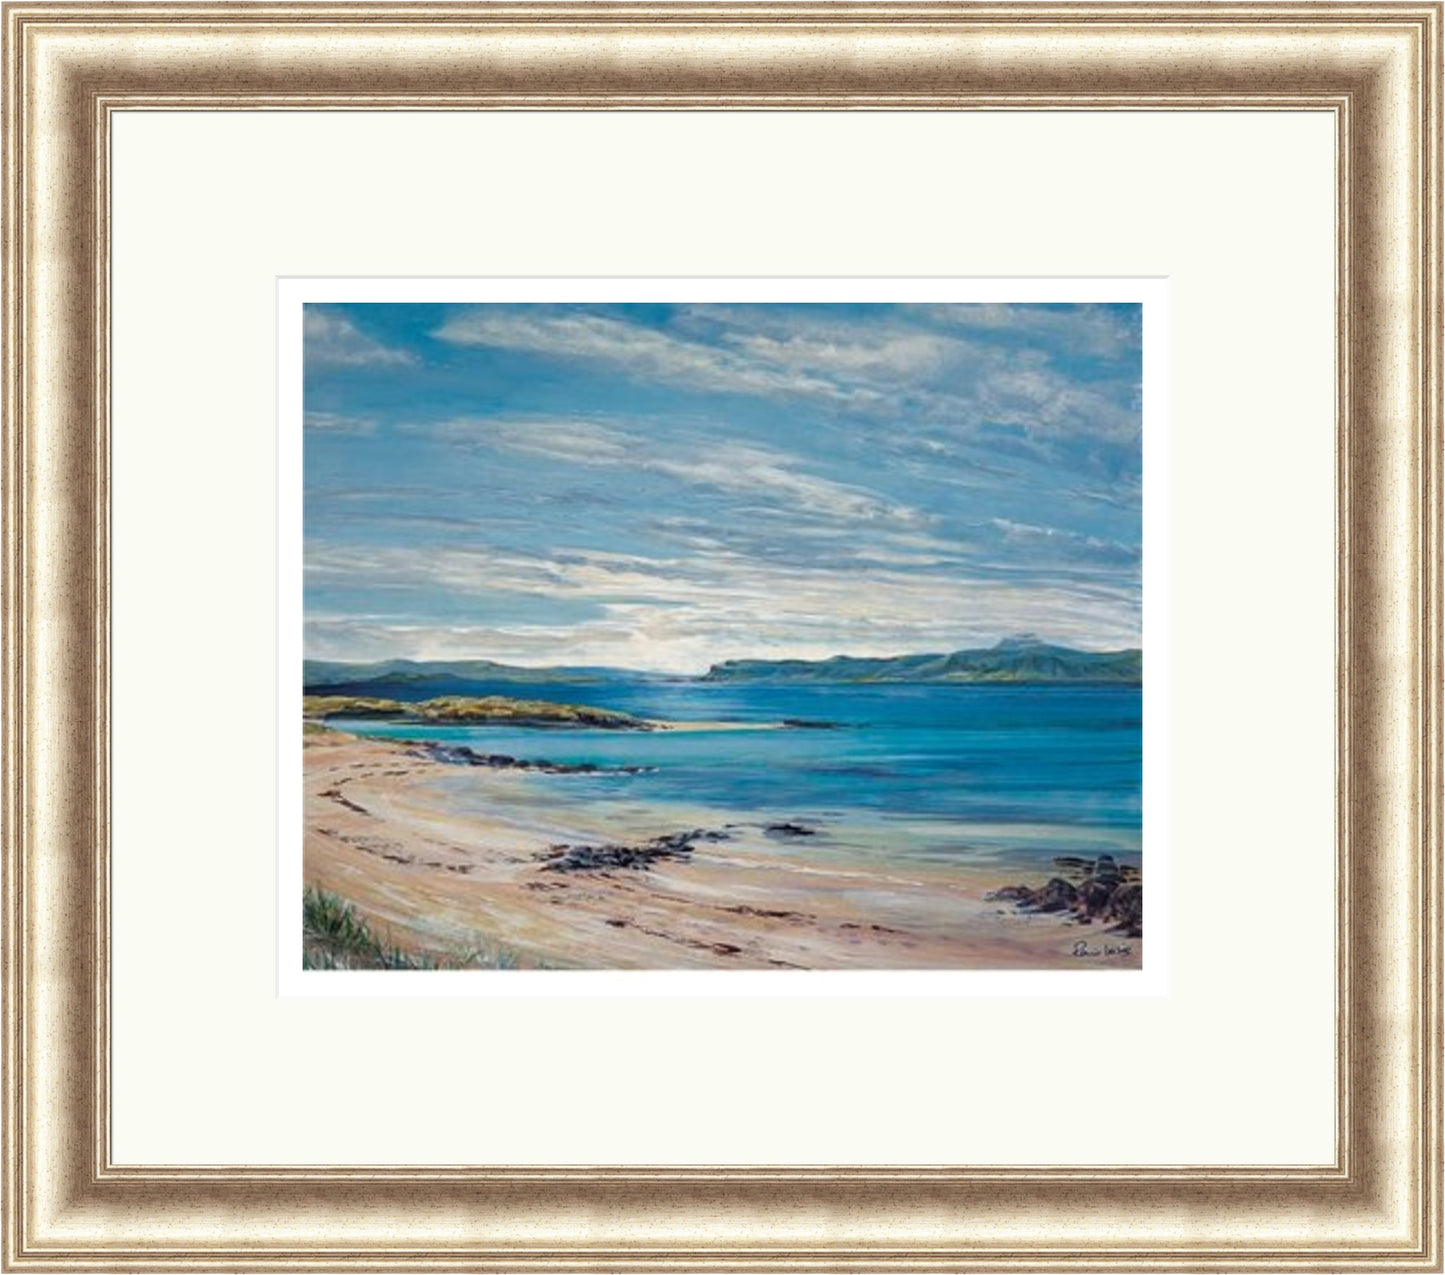 North Sands, Iona by Ronnie Leckie